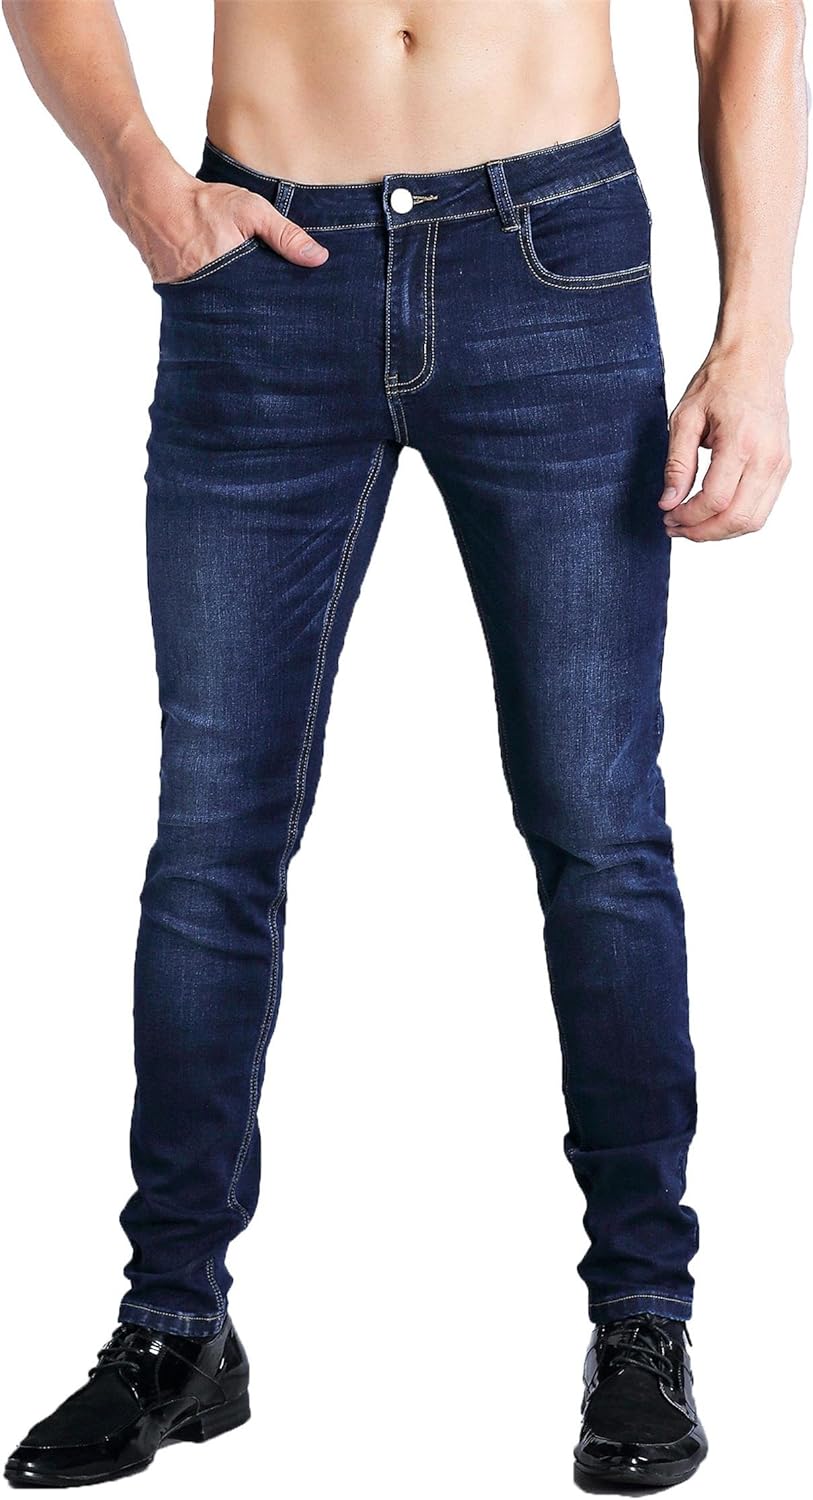 ZLZ Slim Fit Jeans, Men's Younger-Looking Fashionable Colorful Comfy Stretch Skinny Fit Denim Jeans